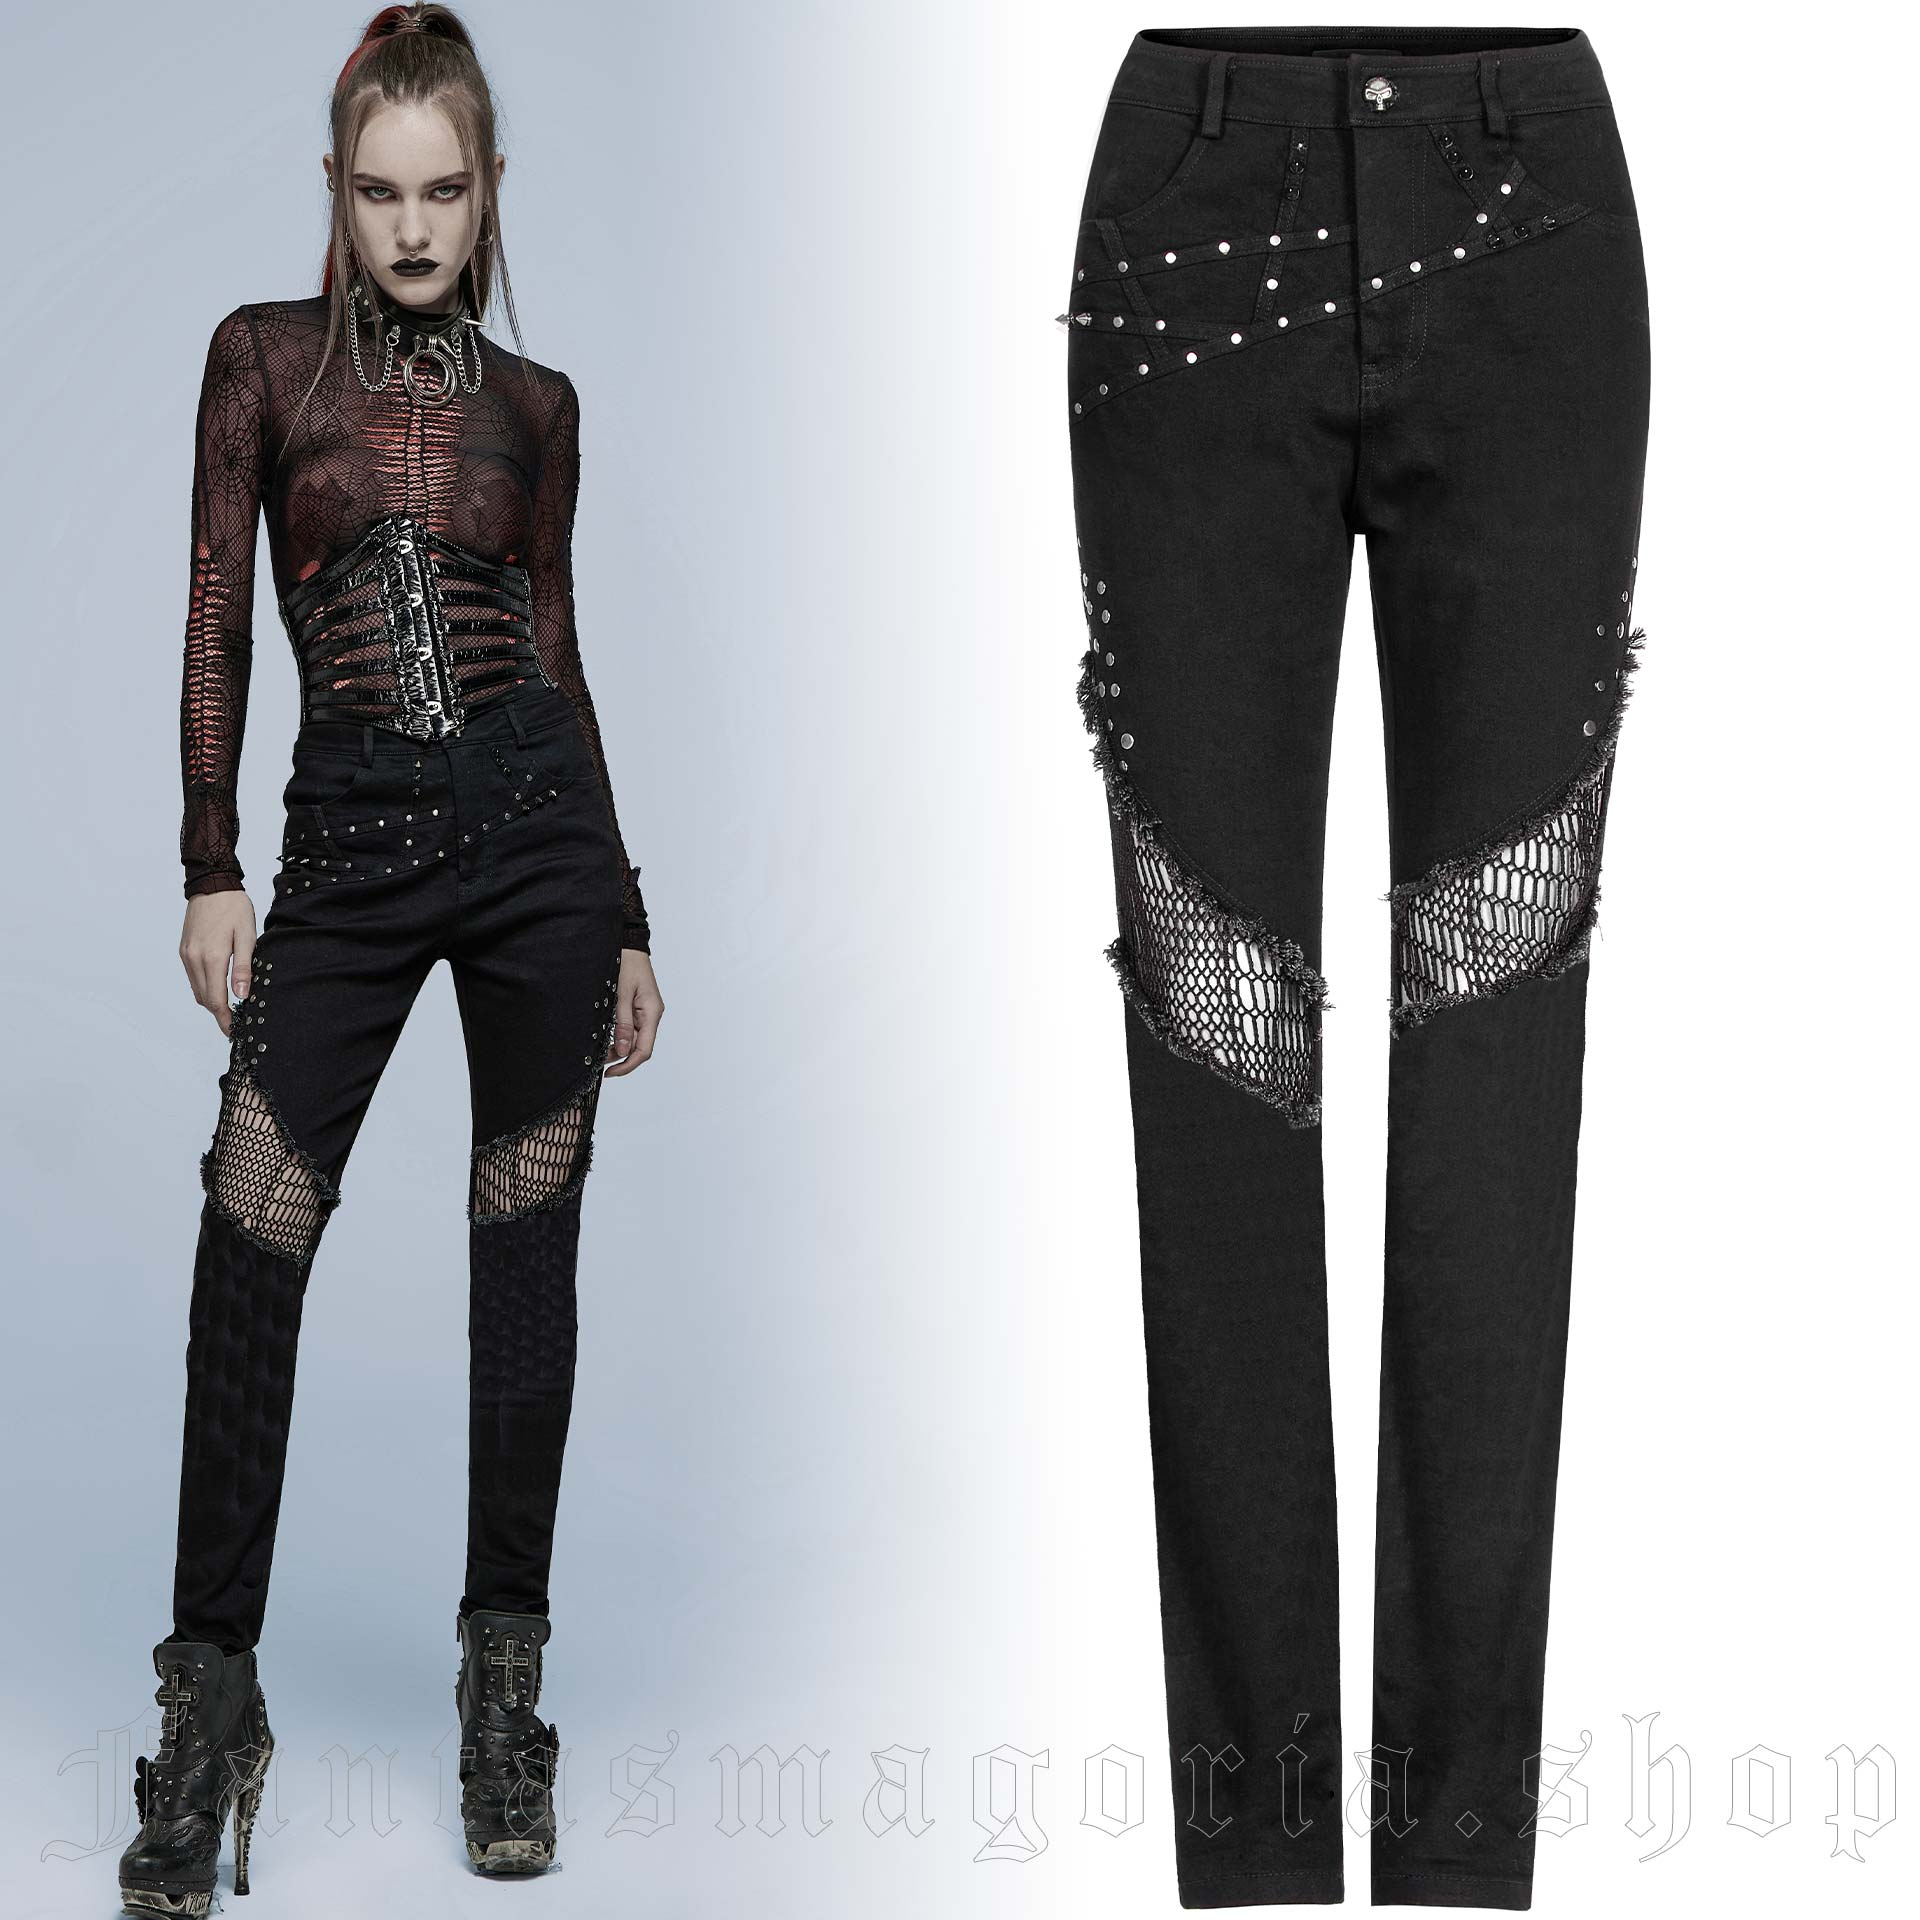 Rebel And Romance Trousers - Punk Rave - WK-495 1